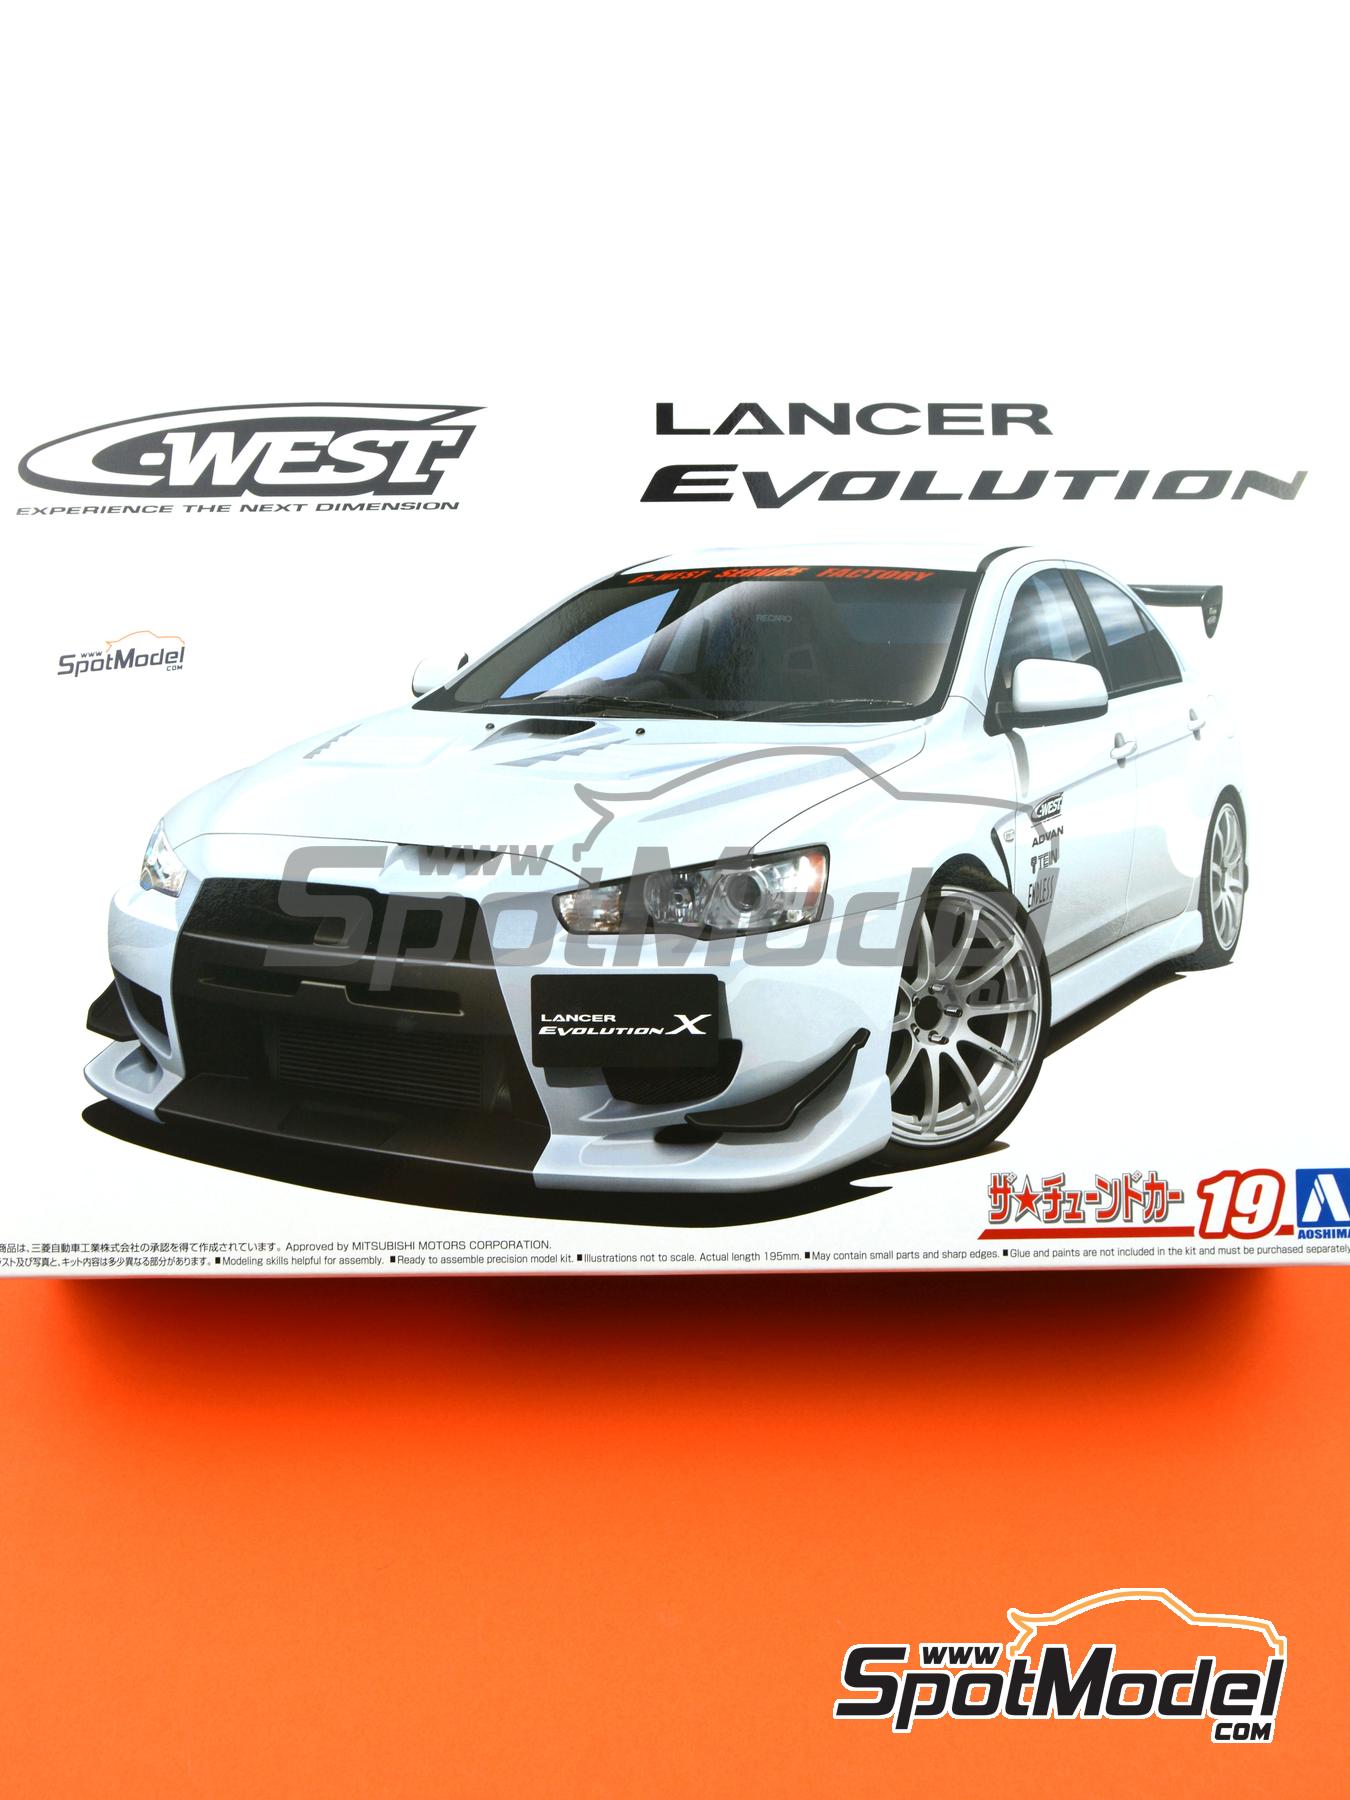 '15 Red Metallic Pre-painted 1/24 Scale Aoshima No.SP Lancer Evolution Final Ed 